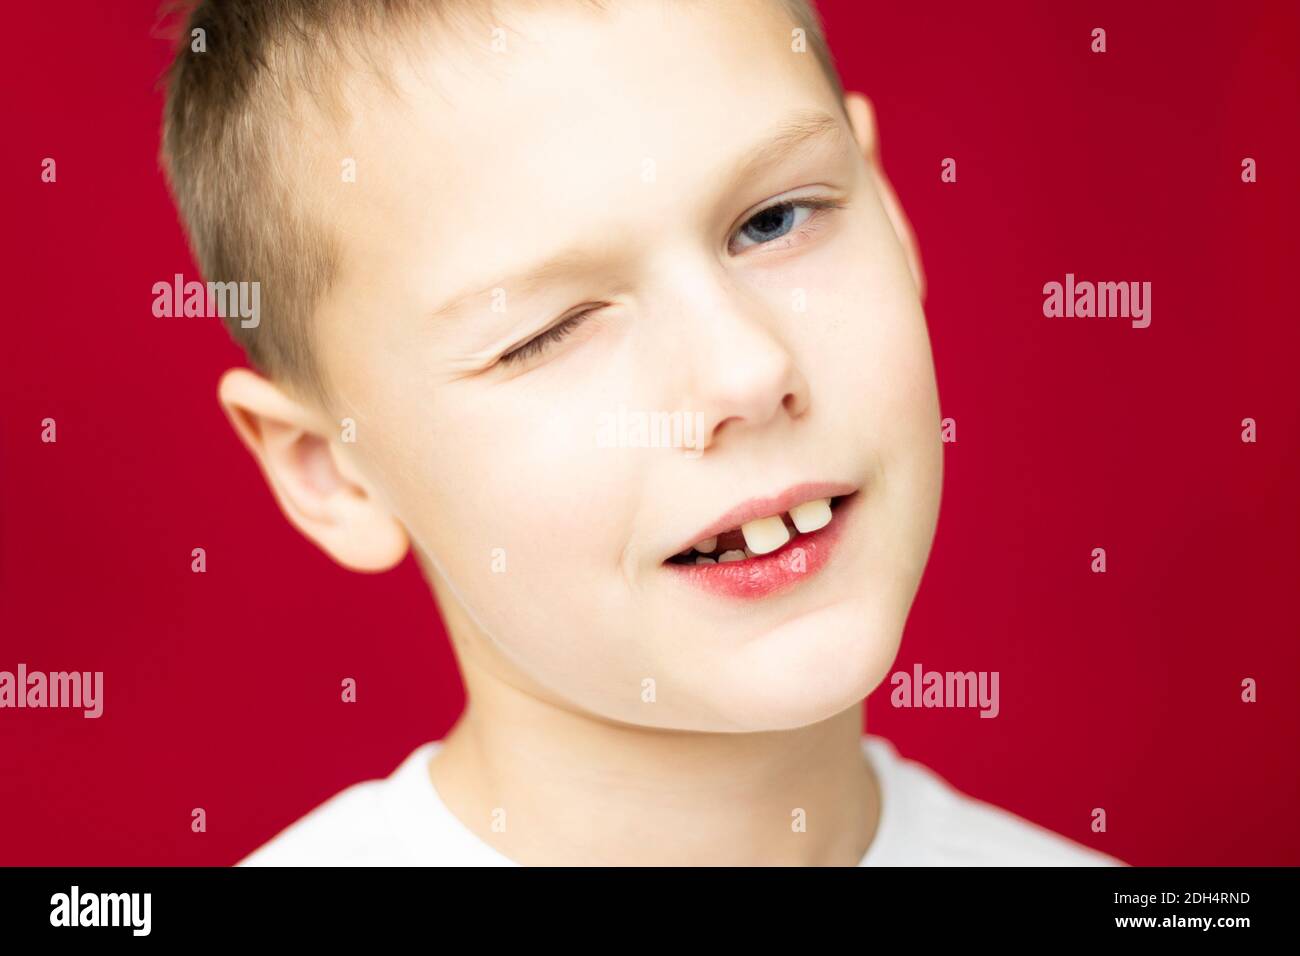 Winking teen boy 7-10 in white t-shirt on red background Stock Photo